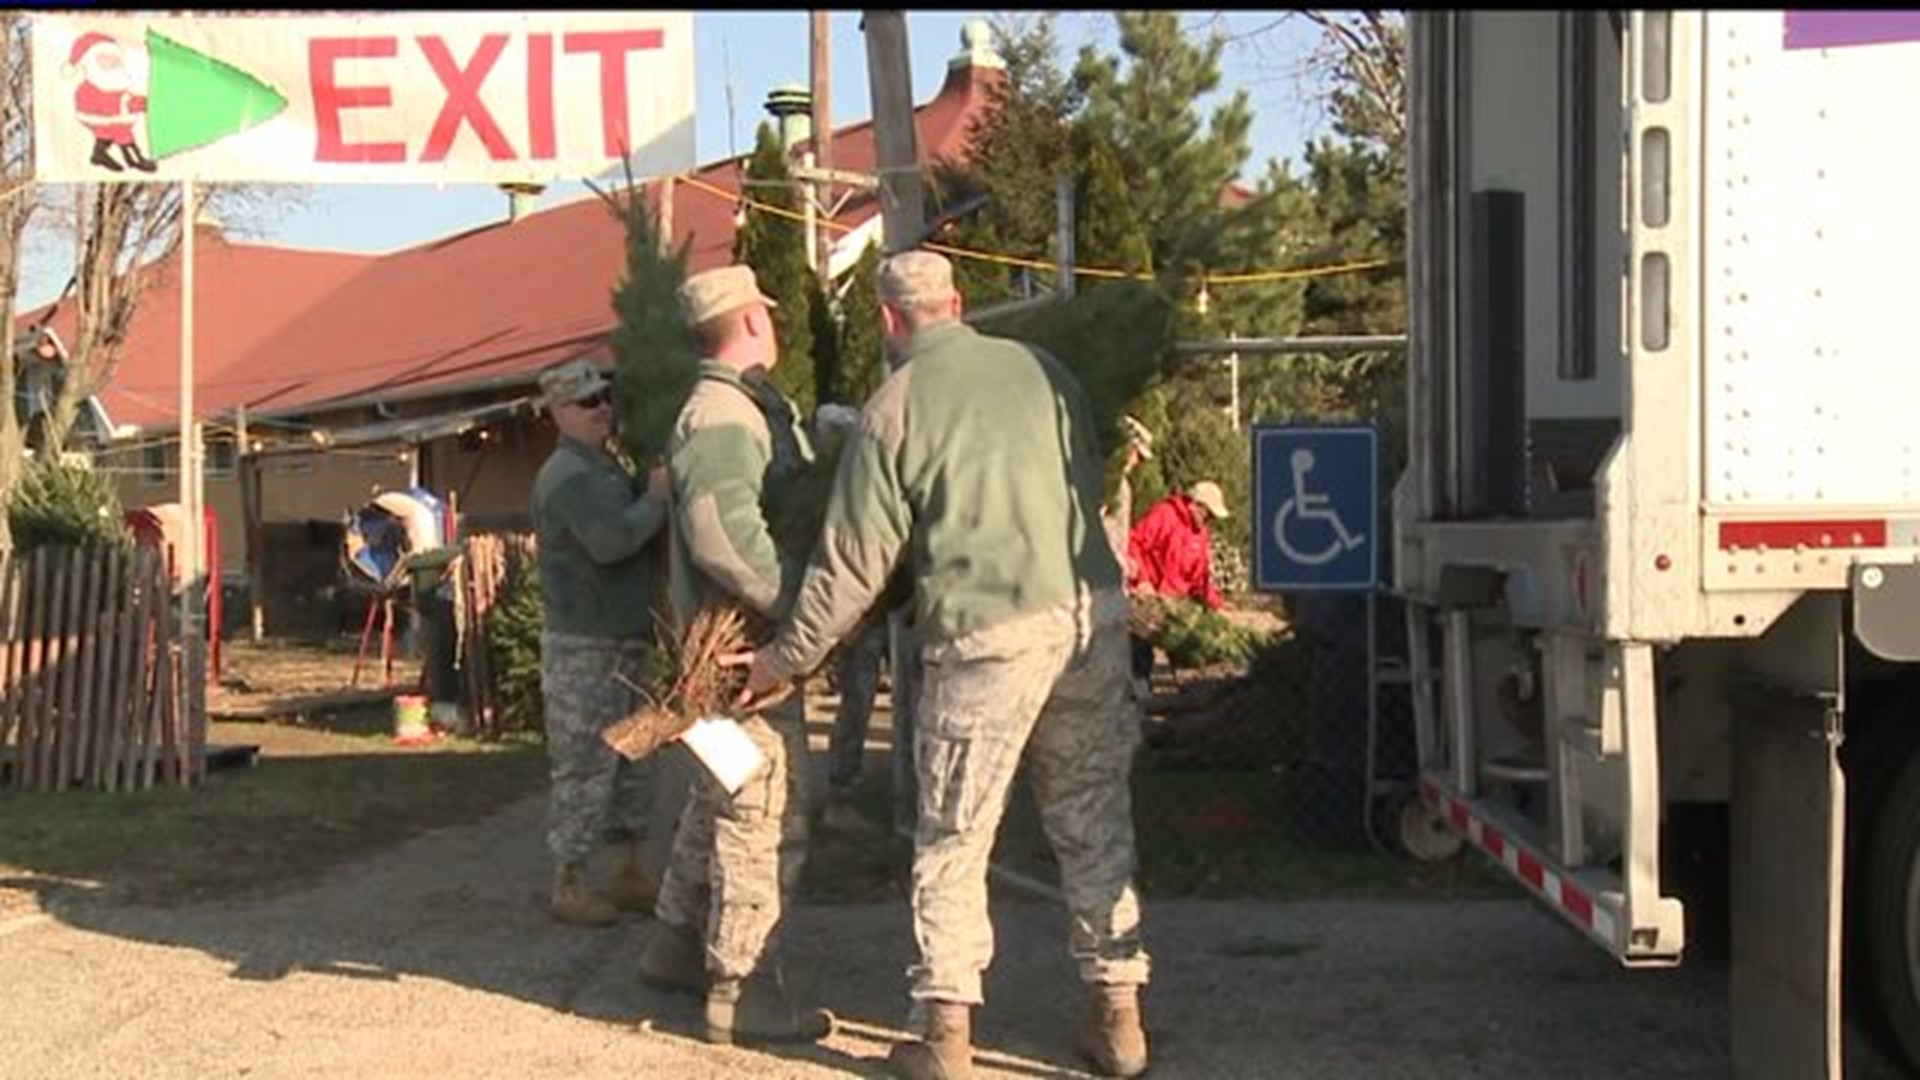 York business to send Christmas trees to troops and military families